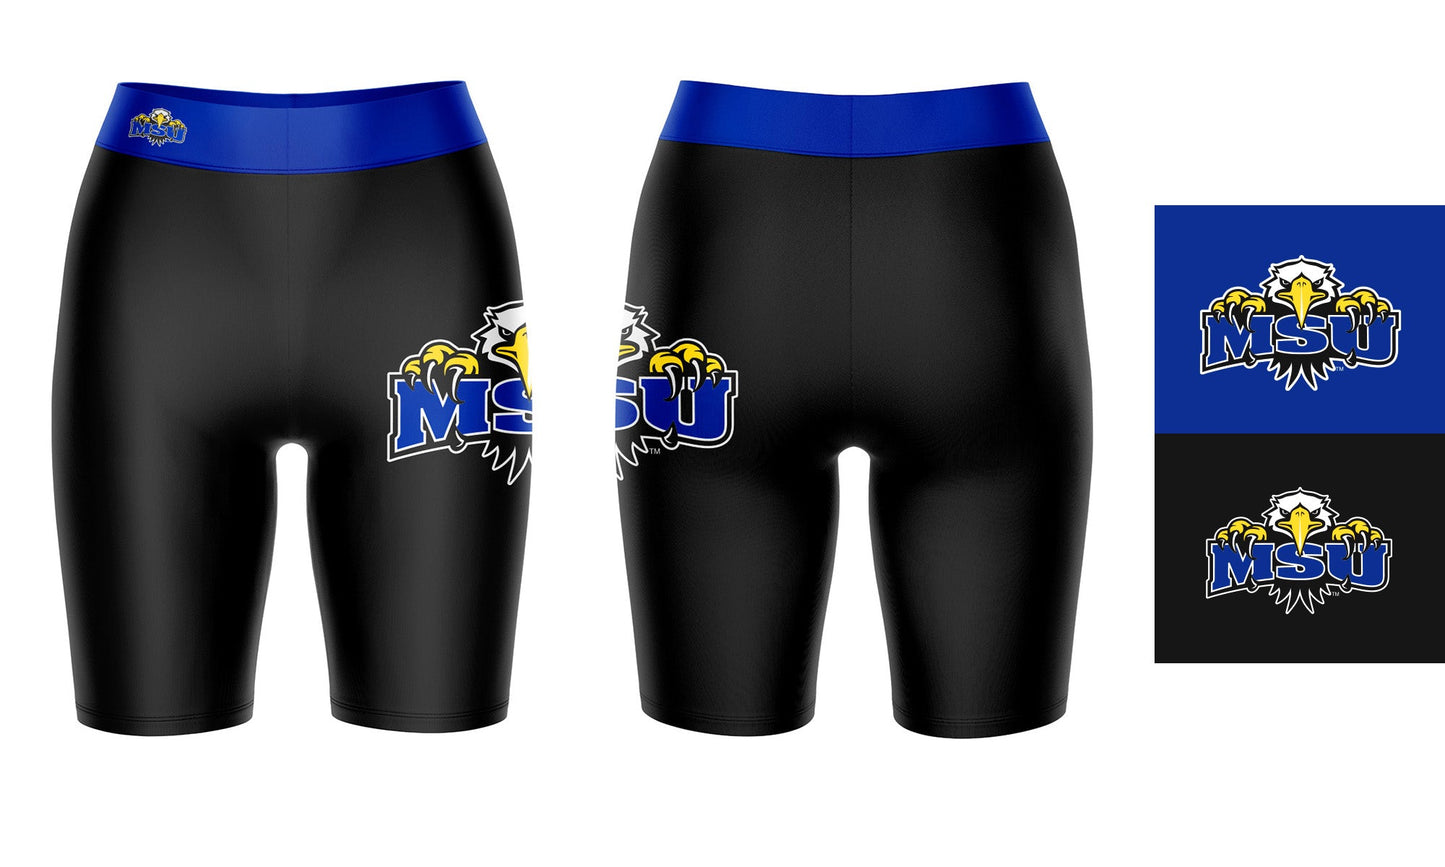 Morehead State Eagles Vive La Fete Game Day Logo on Thigh and Waistband Black and Blue Women Bike Short 9 Inseam"